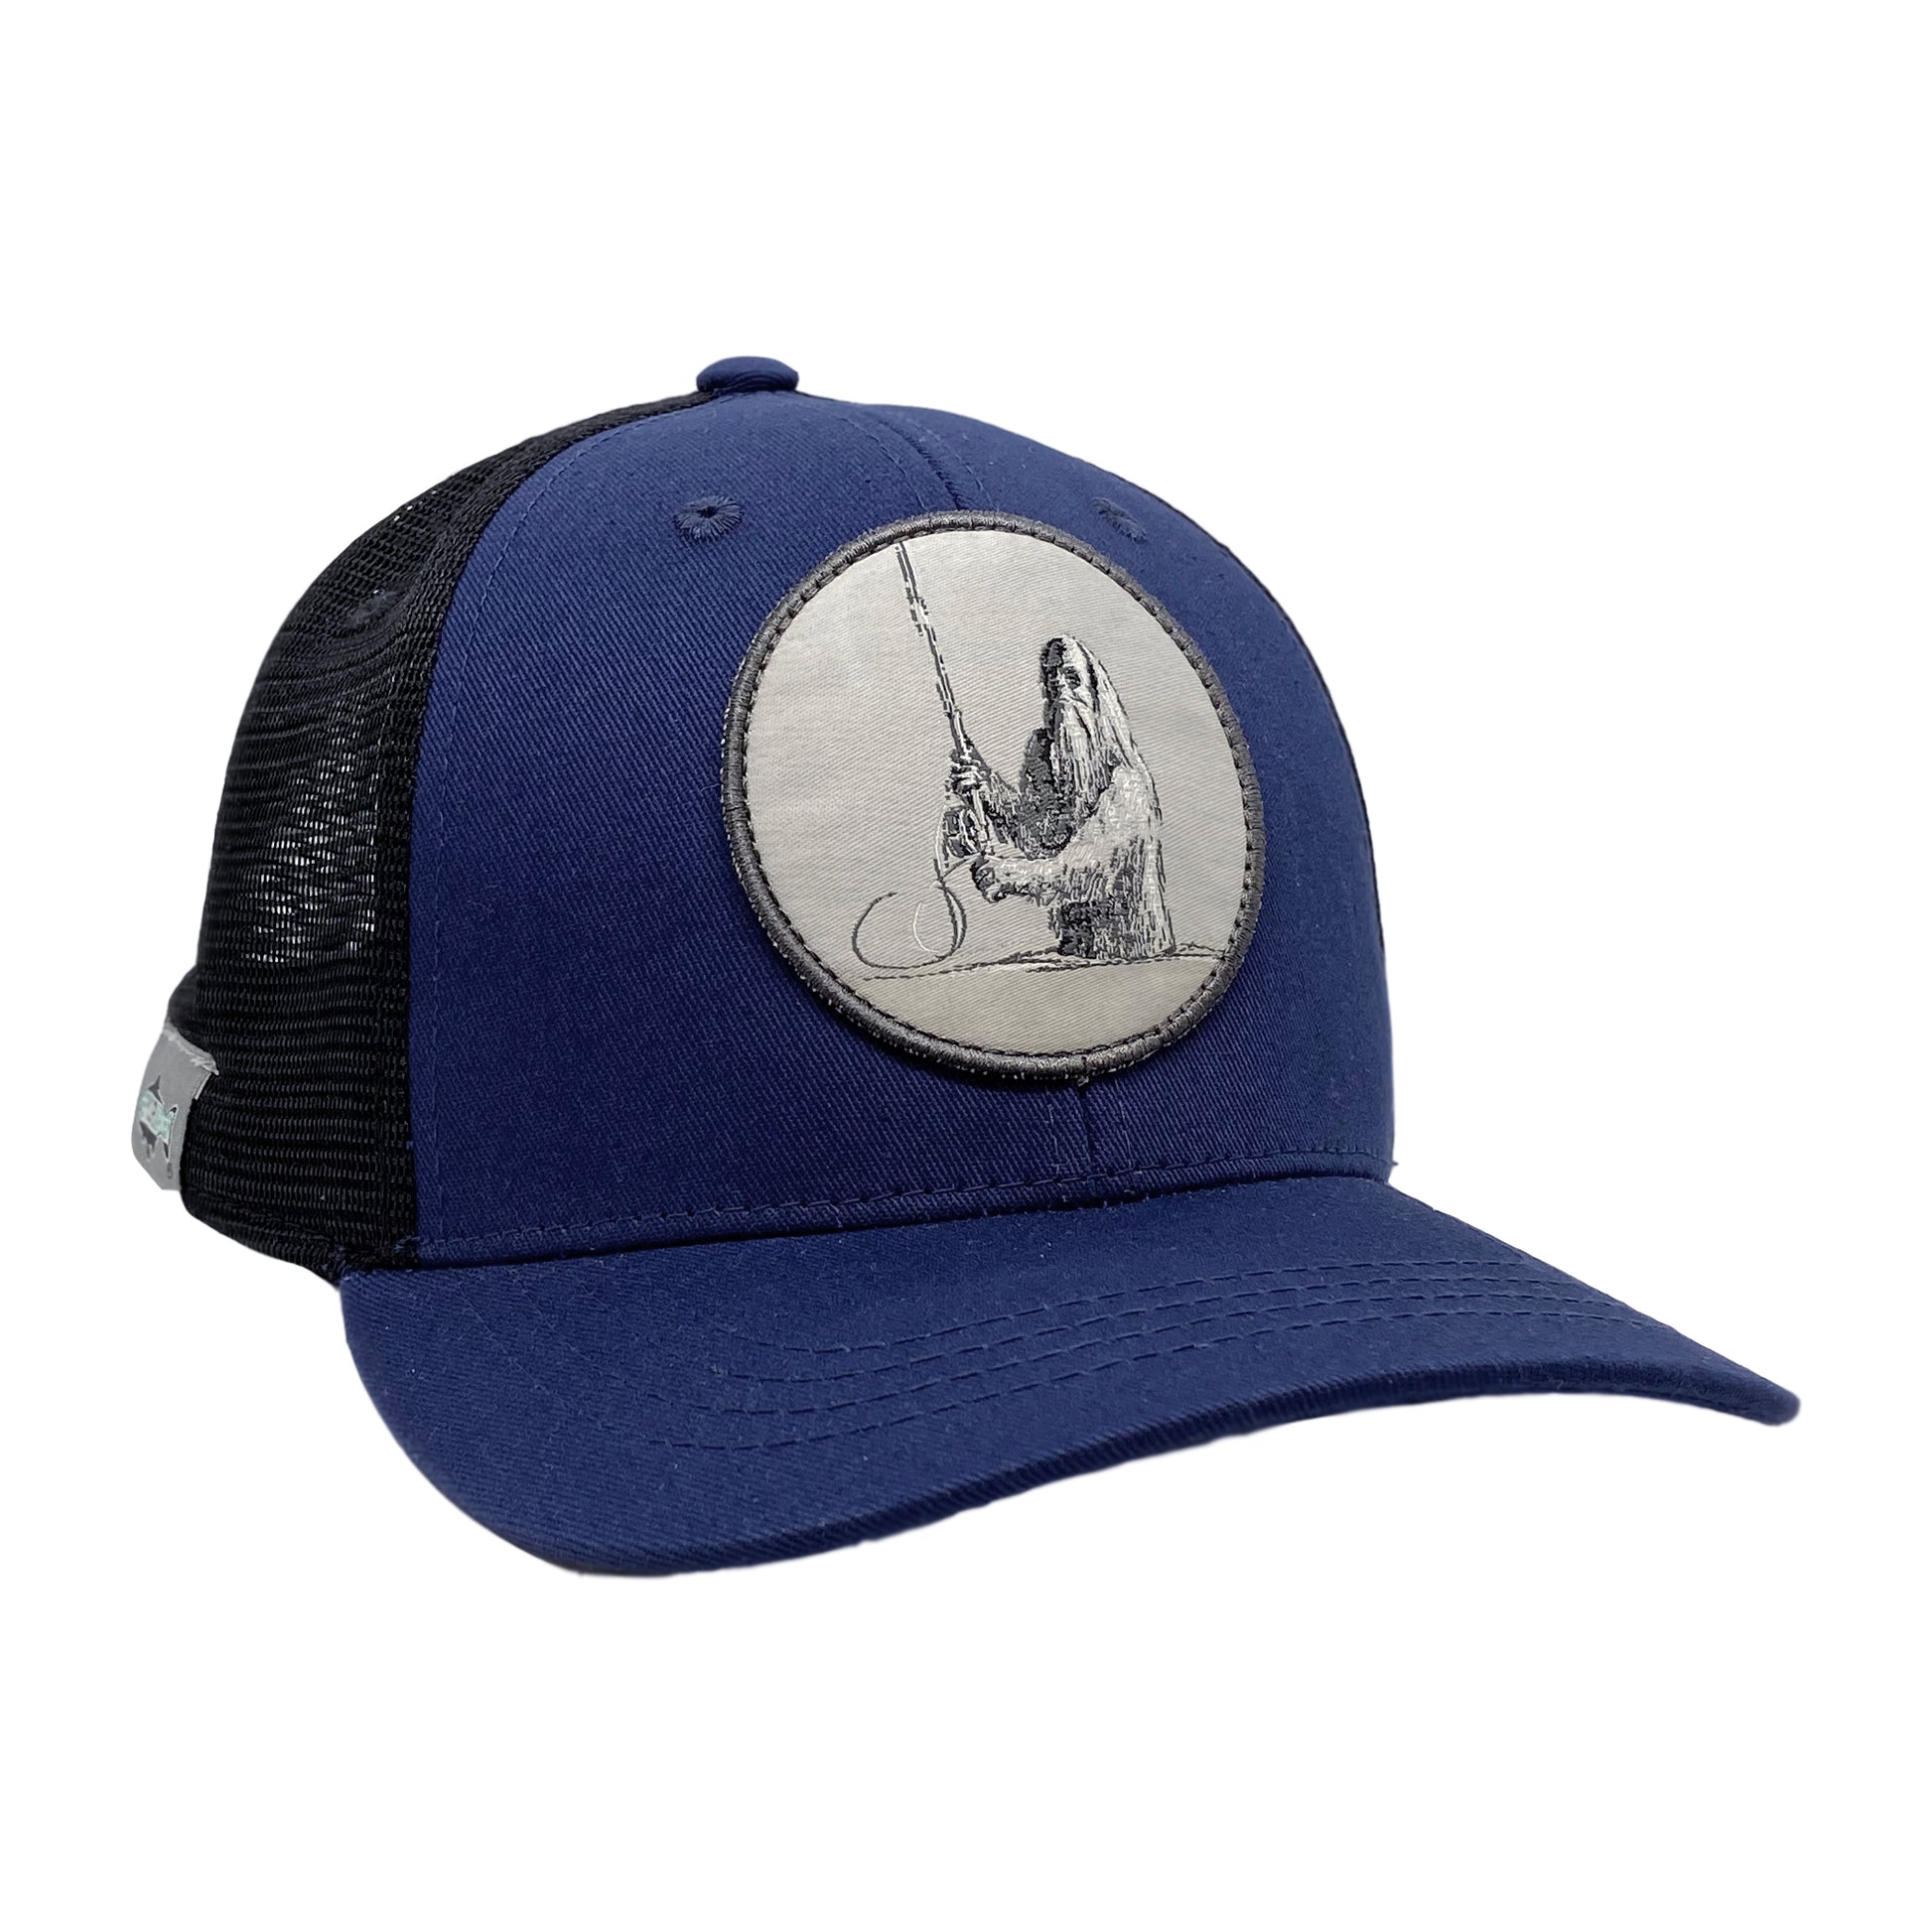 A hat with black mesh in back and blue fabric in front has a patch that features a sasquatch casting a spey rod